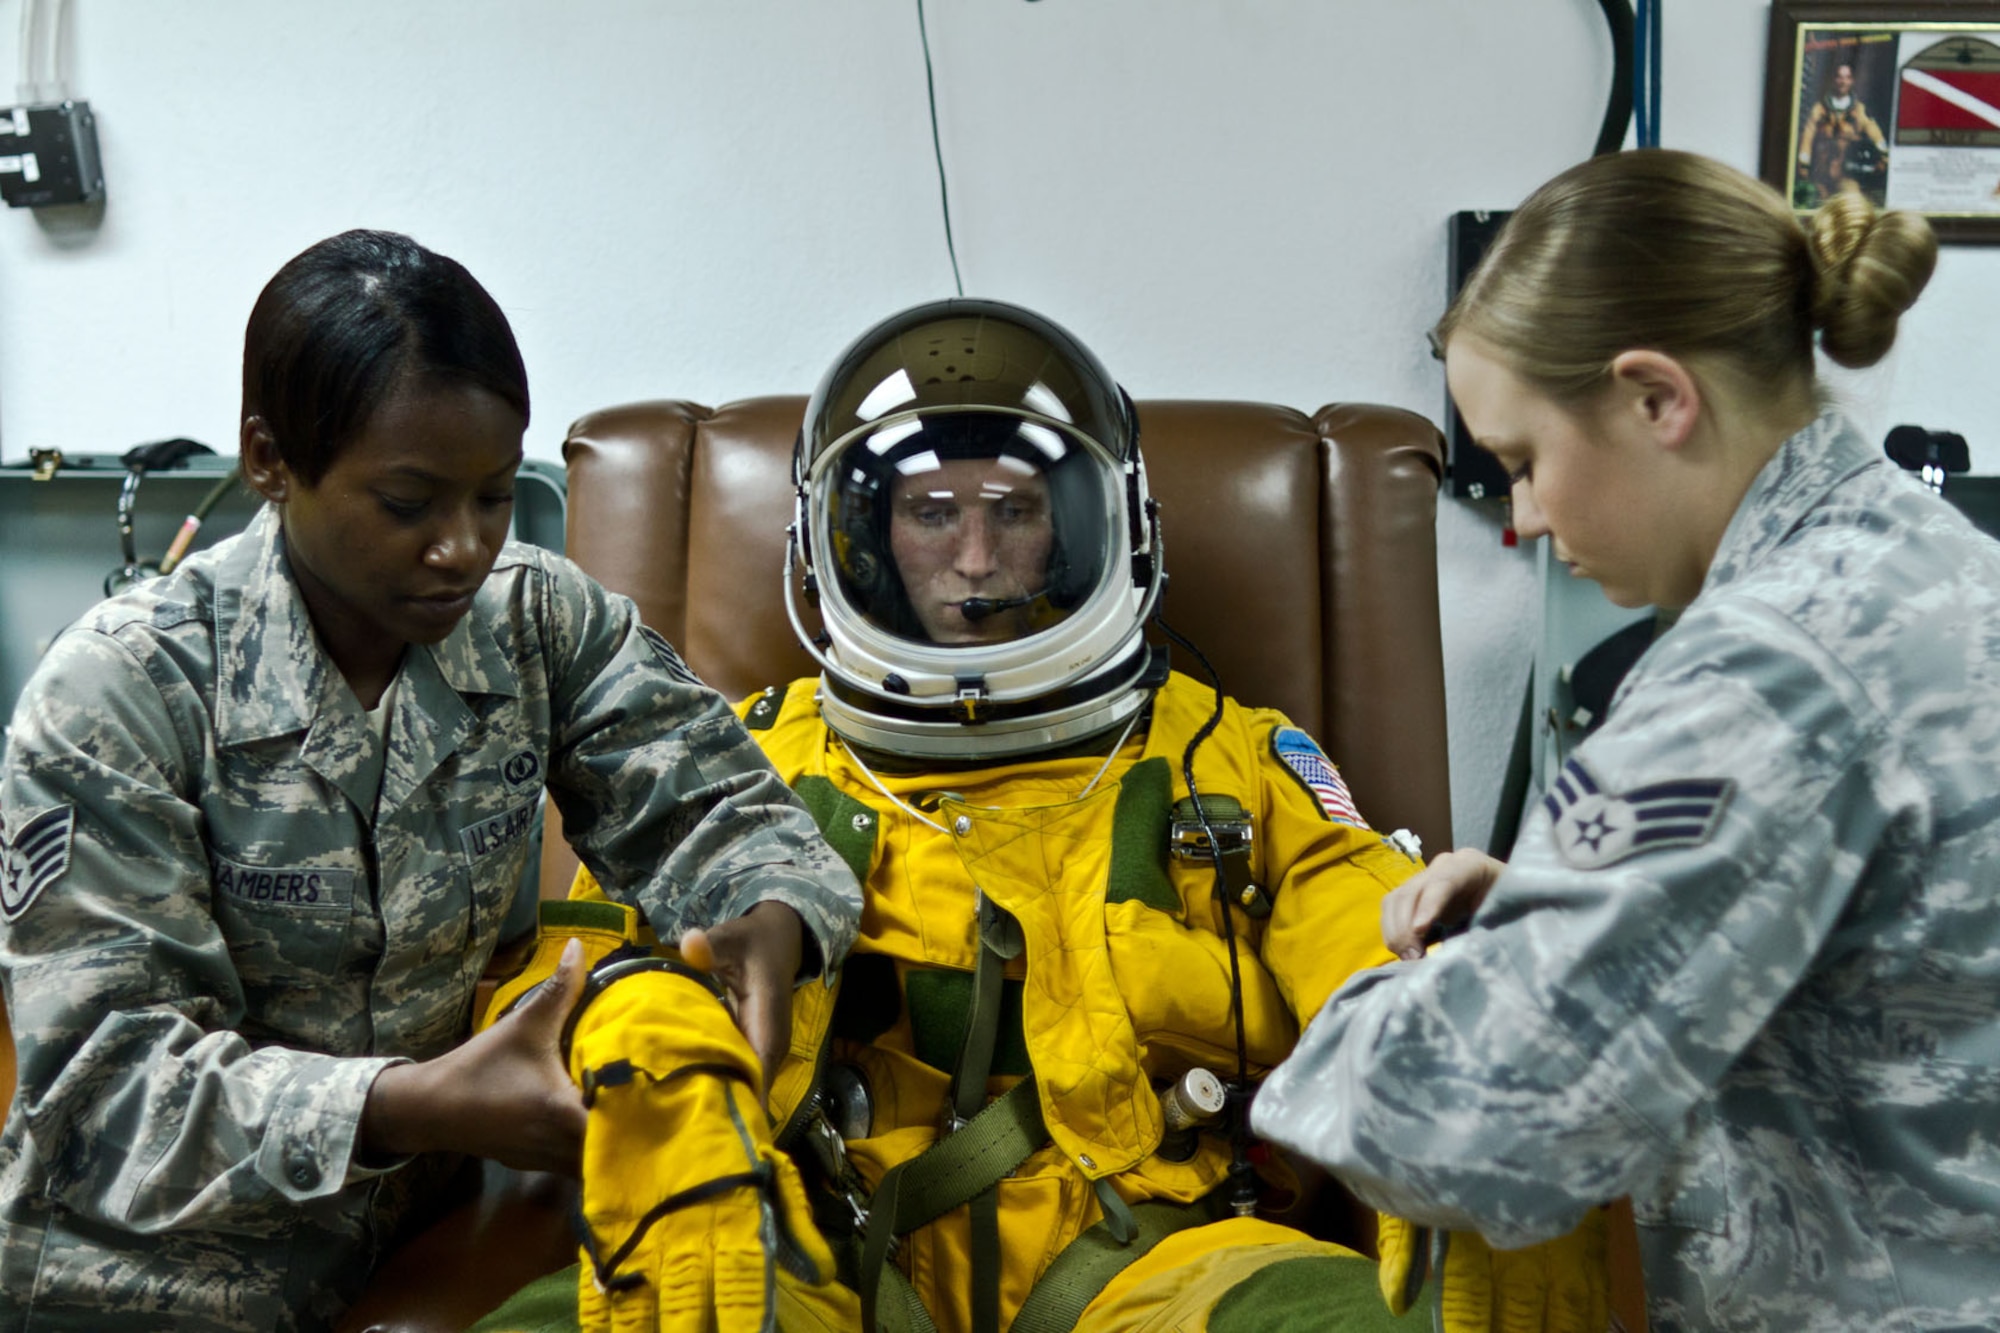 SOUTHWEST ASIA - U.S. Air Force Staff Sgt. Jasmine Chambers and Senior Airman Cortney Reeb, 99th Expeditionary Reconnaissance Squadron physiology support detachment technicians, help Capt. Peter, 99th ERS U-2 pilot, into a full-pressure suit before testing its integrity July 17, 2012. The U-2 routinely flies at altitudes in excess of 70,000 feet, which requires the pilot to wear the suit. (U.S. Air Force photo/Senior Airman Alexander Recupero)